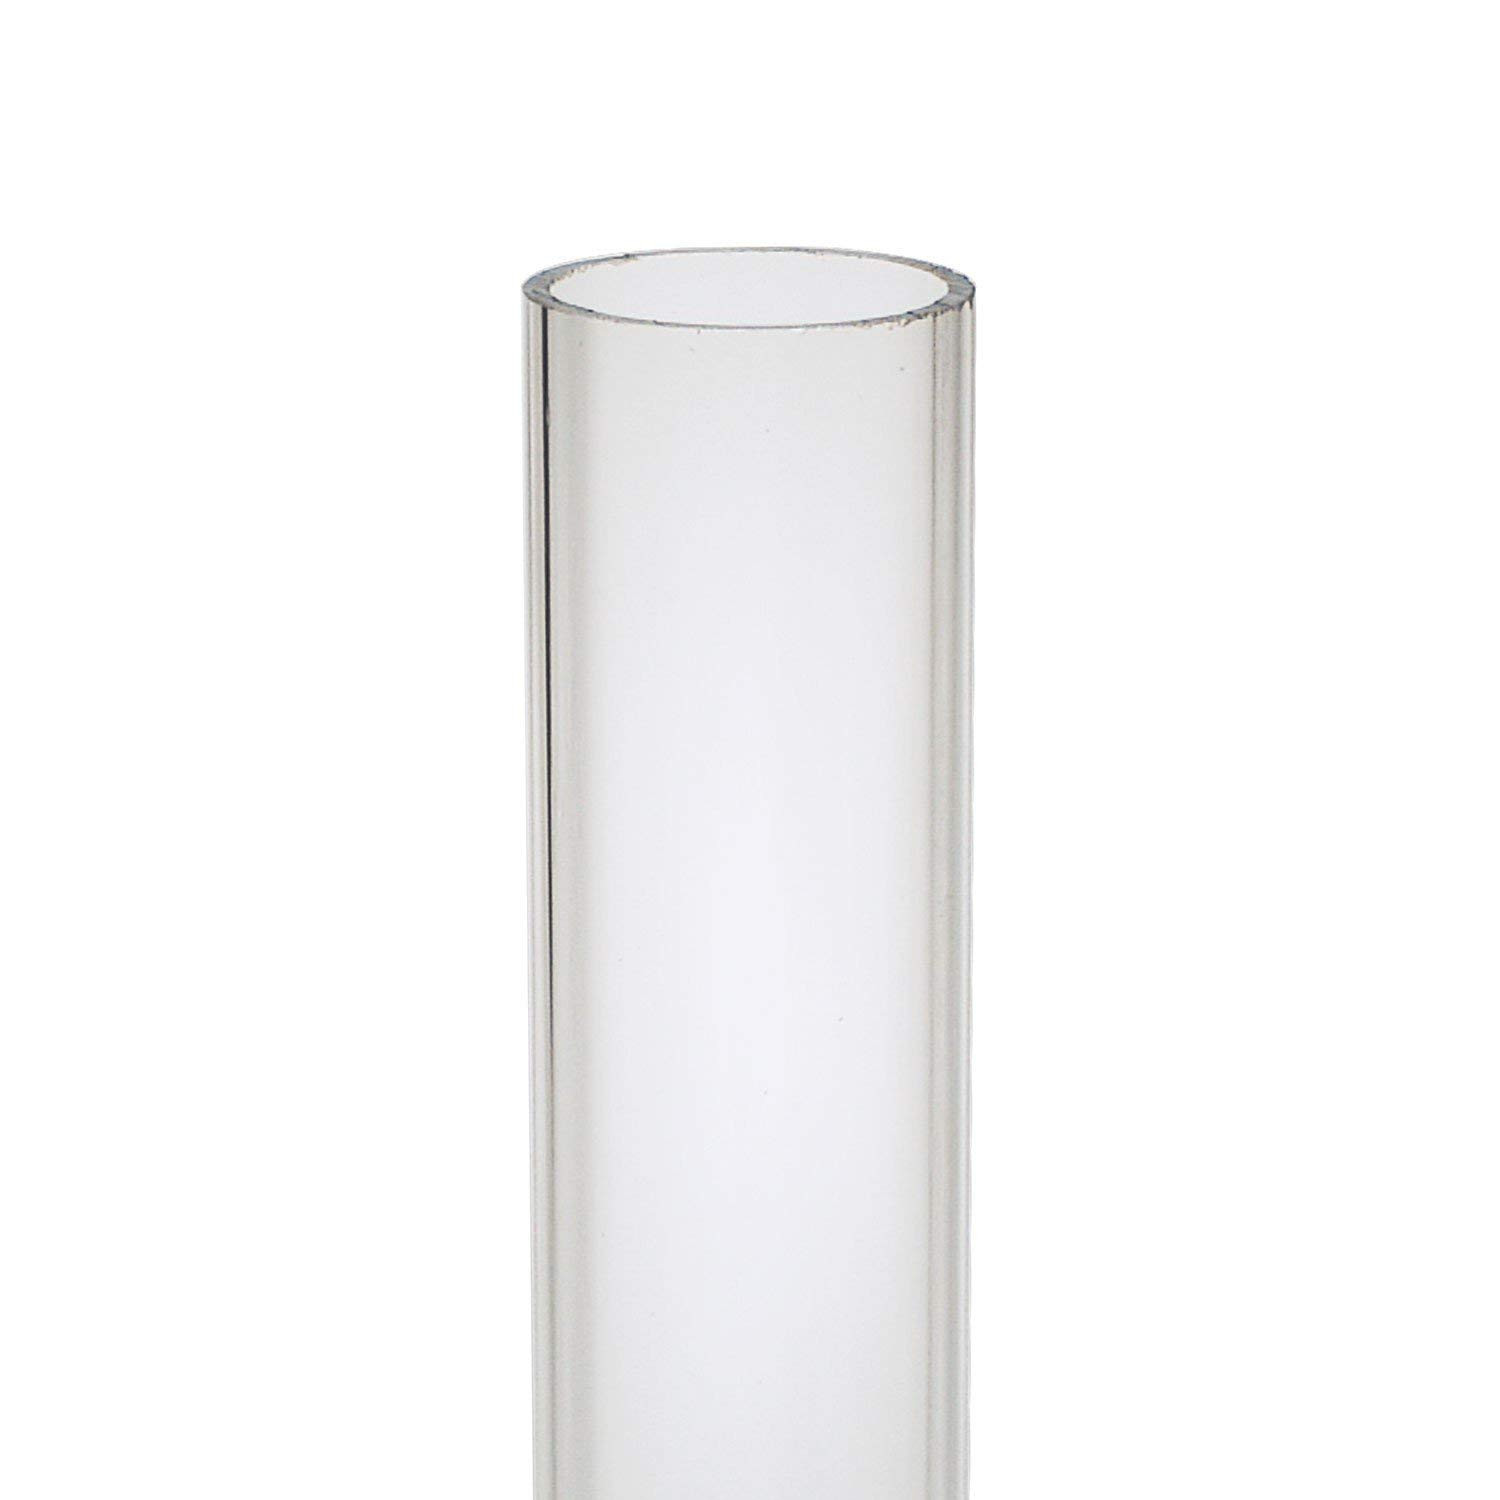 13 Lovely 24 Inch Clear Vases 2024 free download 24 inch clear vases of amazon com source one deluxe clear acrylic tube 2 inches thick 24 with amazon com source one deluxe clear acrylic tube 2 inches thick 24 inch 2 inch wide office produc